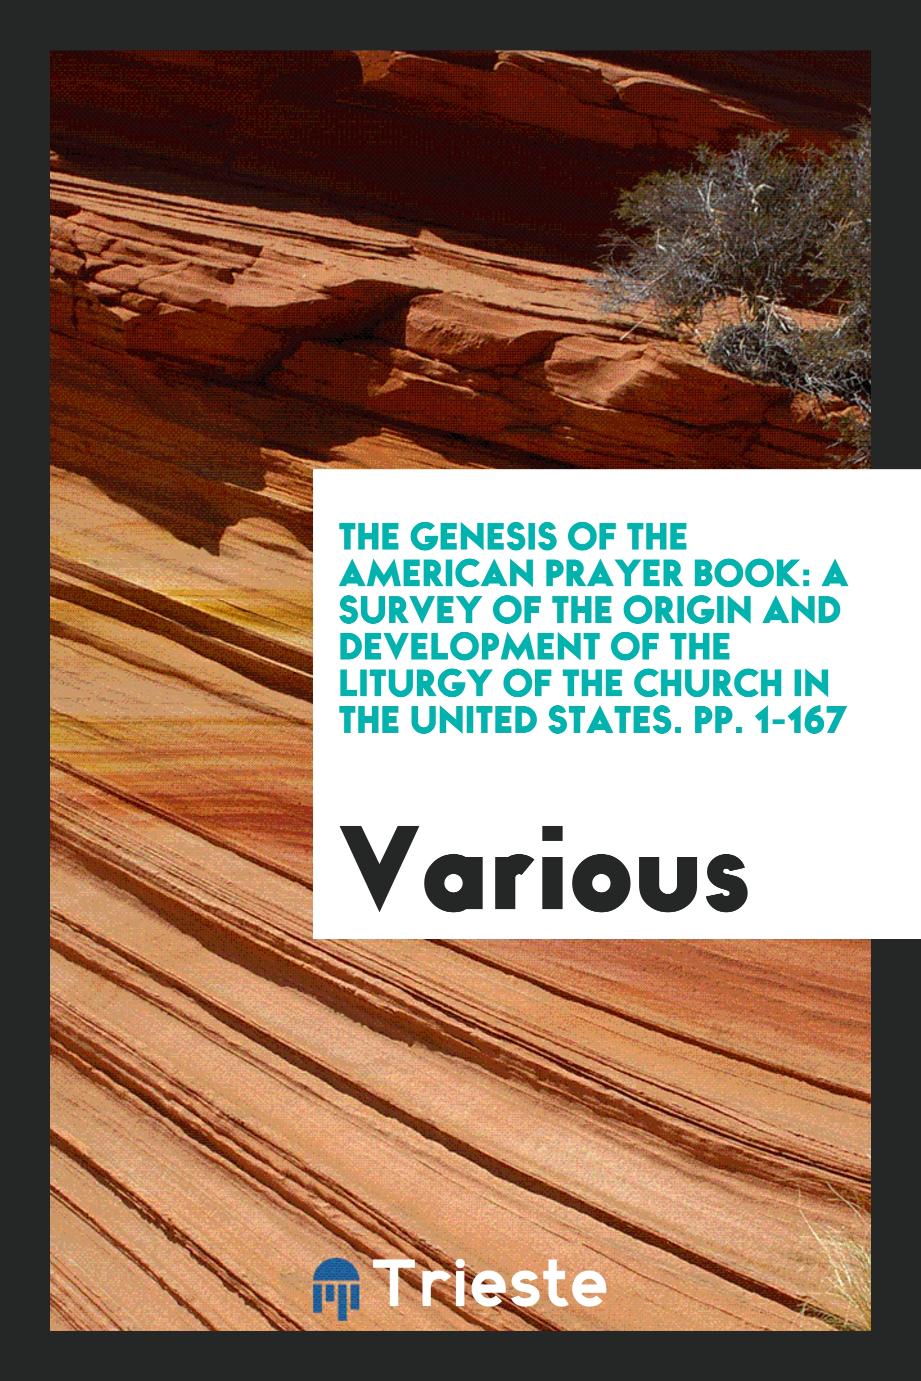 The Genesis of the American Prayer Book: A Survey of the Origin and Development of the Liturgy of the Church in the United States. pp. 1-167